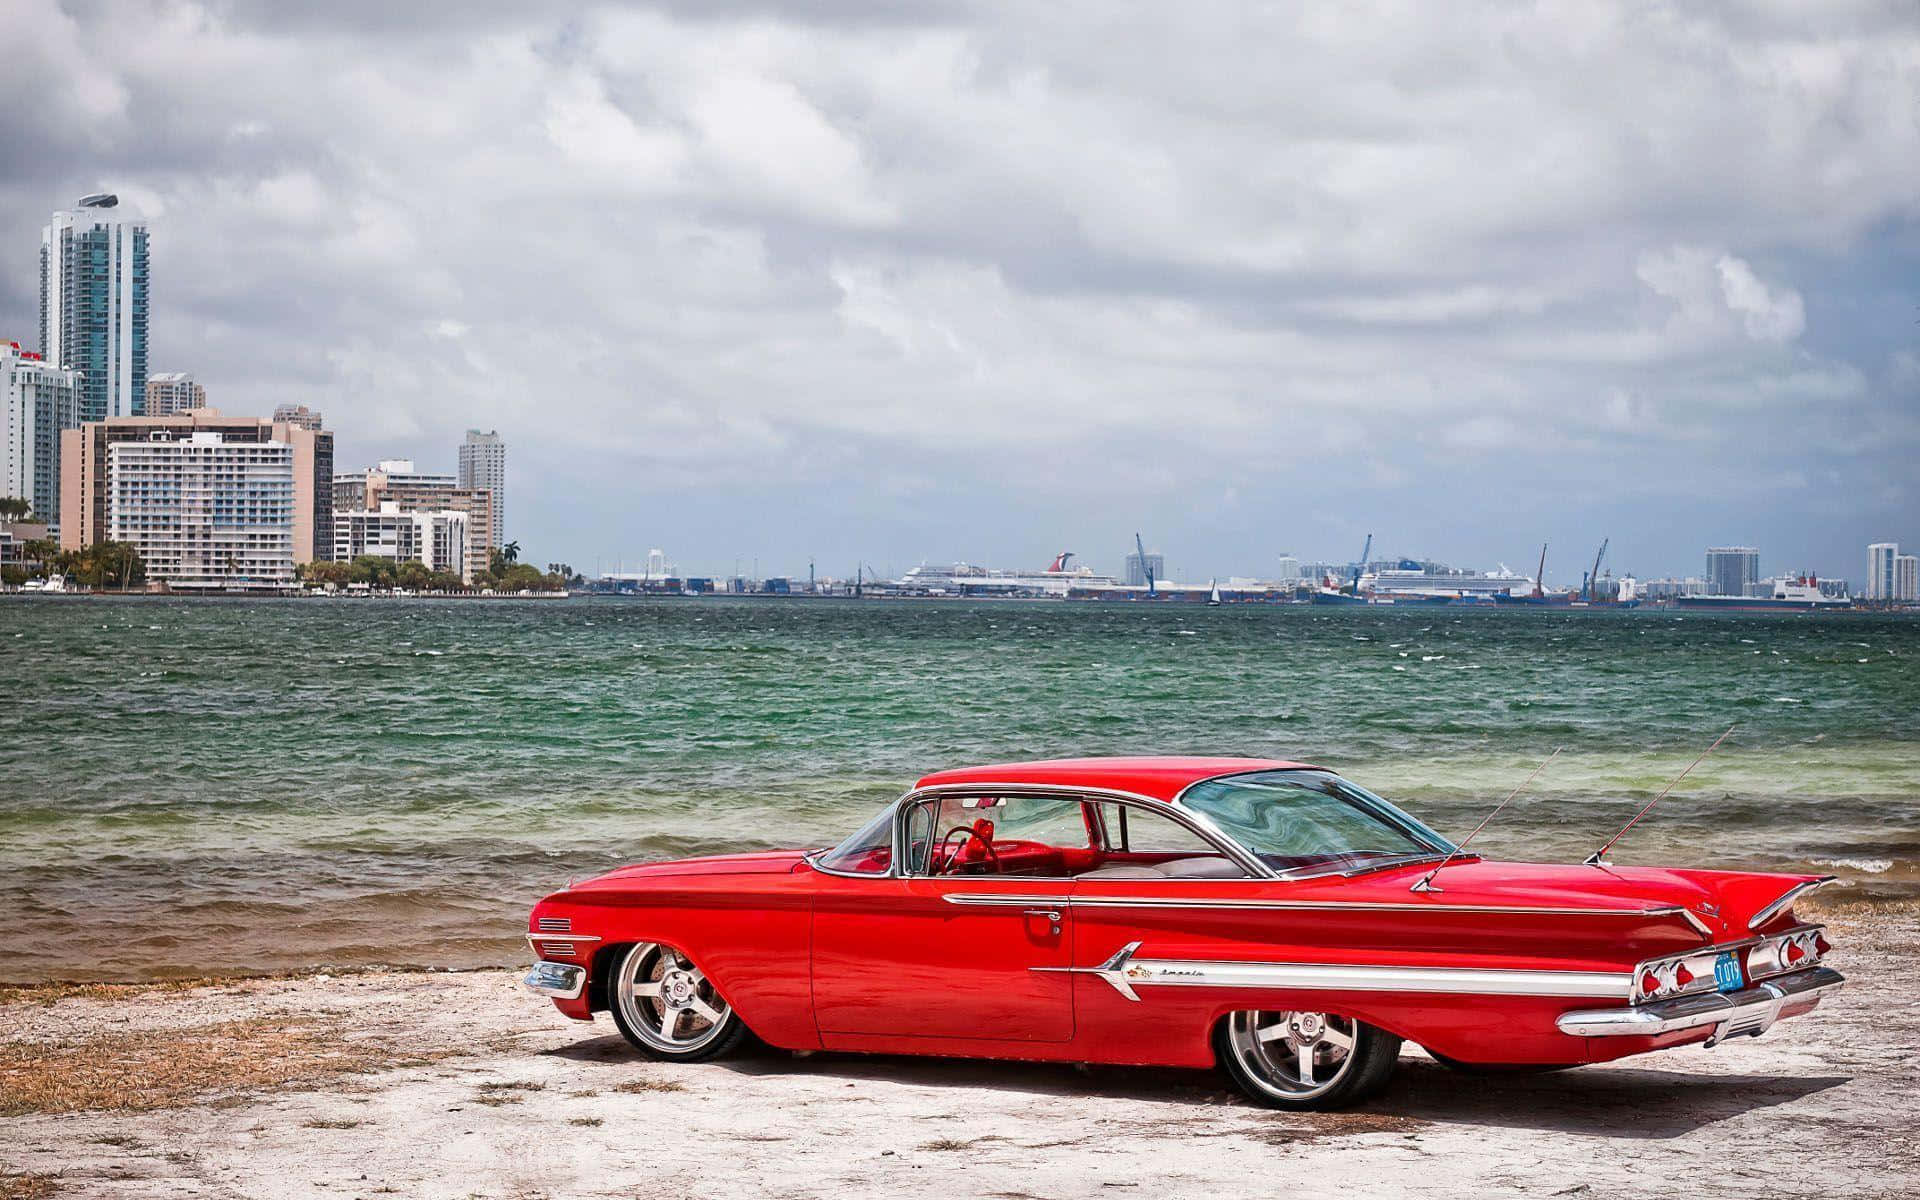 Chevrolet Impala 1967 Vintage Car On The Beach Pictures